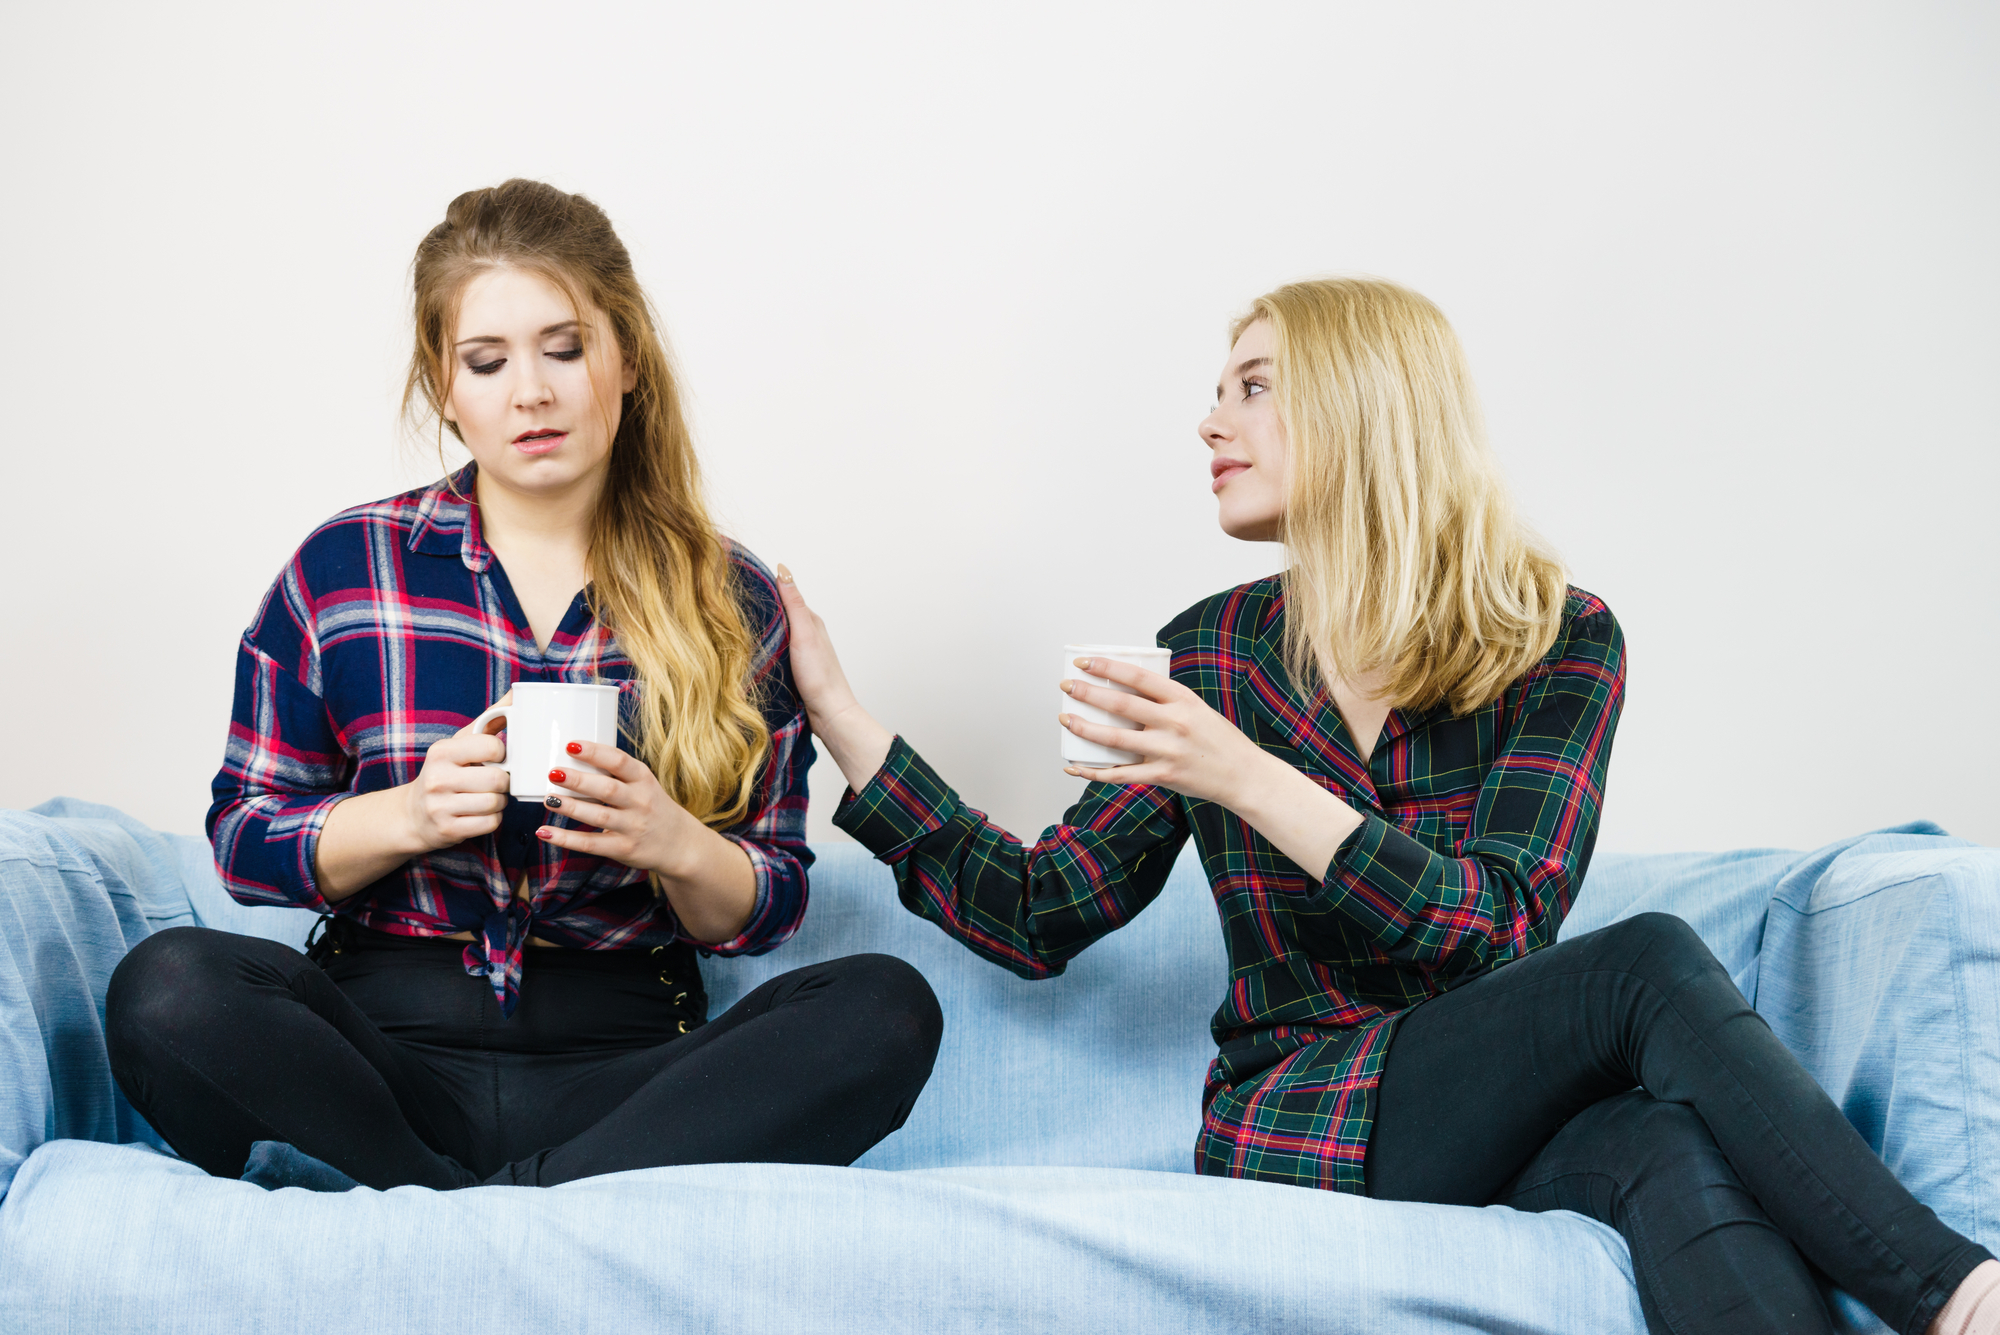 Two women sitting on a blue couch, both holding mugs. The woman on the left, with long brown hair, looks sad and is looking down. The woman on the right, with blonde hair, appears to be comforting her by placing a hand on her shoulder. Both are wearing plaid shirts.